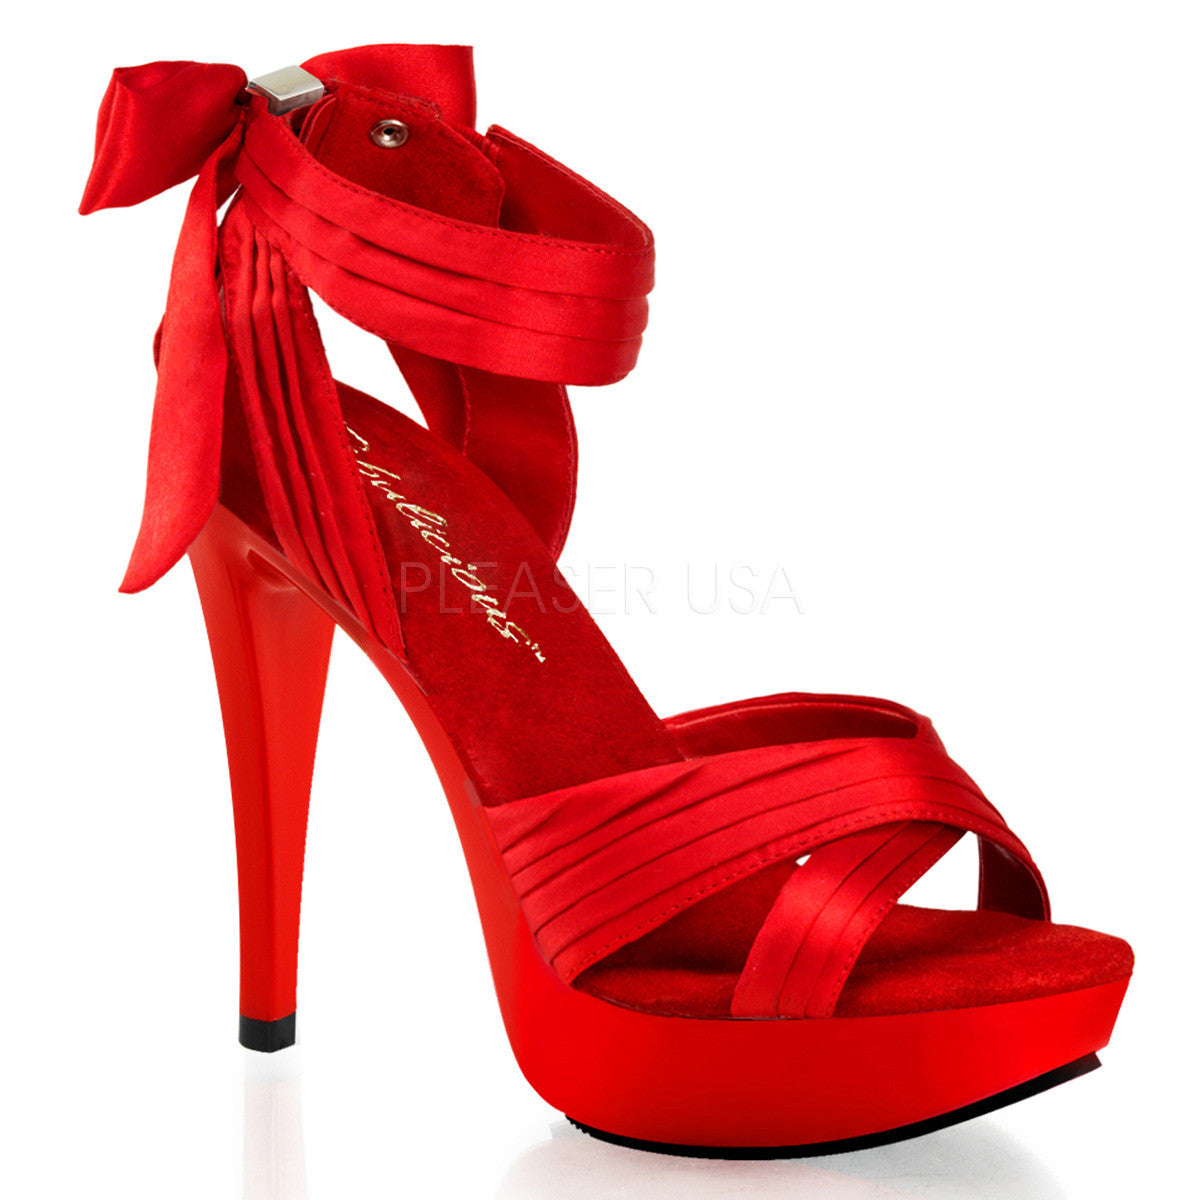 FABULICIOUS COCKTAIL-568 Red Satin-Red Closed Back Sandals - Shoecup.com